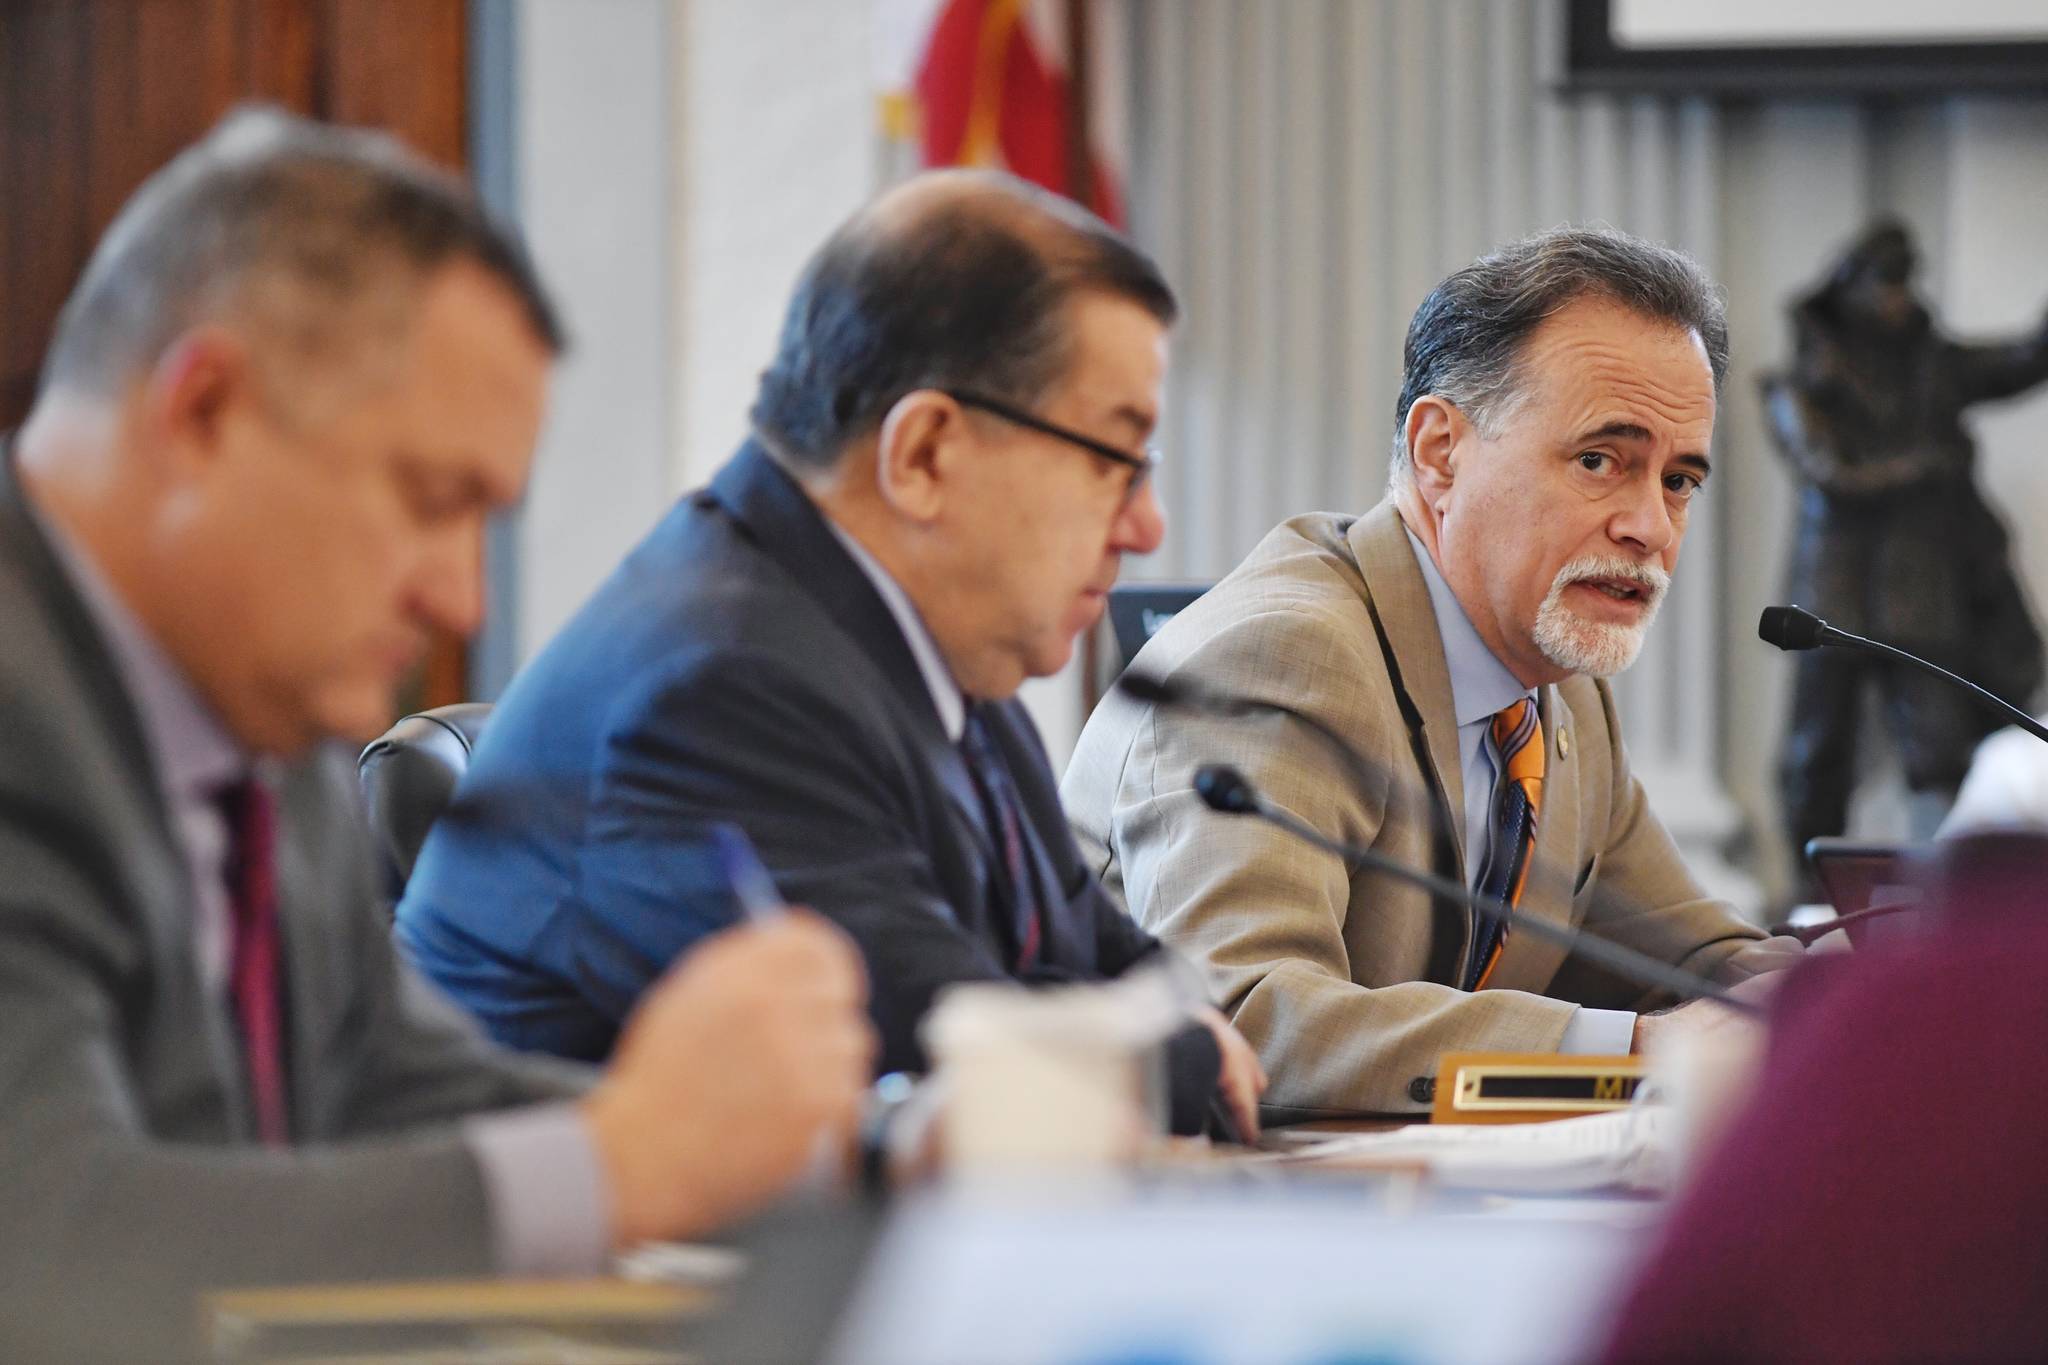 Sen. Peter Micciche, R-Soldotna, right, asks a questionduring a Senate Finance Committee meeting with Lacey Sanders, Budget Director for the Office of Management and Budget, about consolidation of department positions on Monday, Feb. 25, 2019. Sen. Lyman Hoffman, D-Bethel, center, and Sen. Mike Shower, R-Wasilla, left, are also shown. (Michael Penn | Juneau Empire)